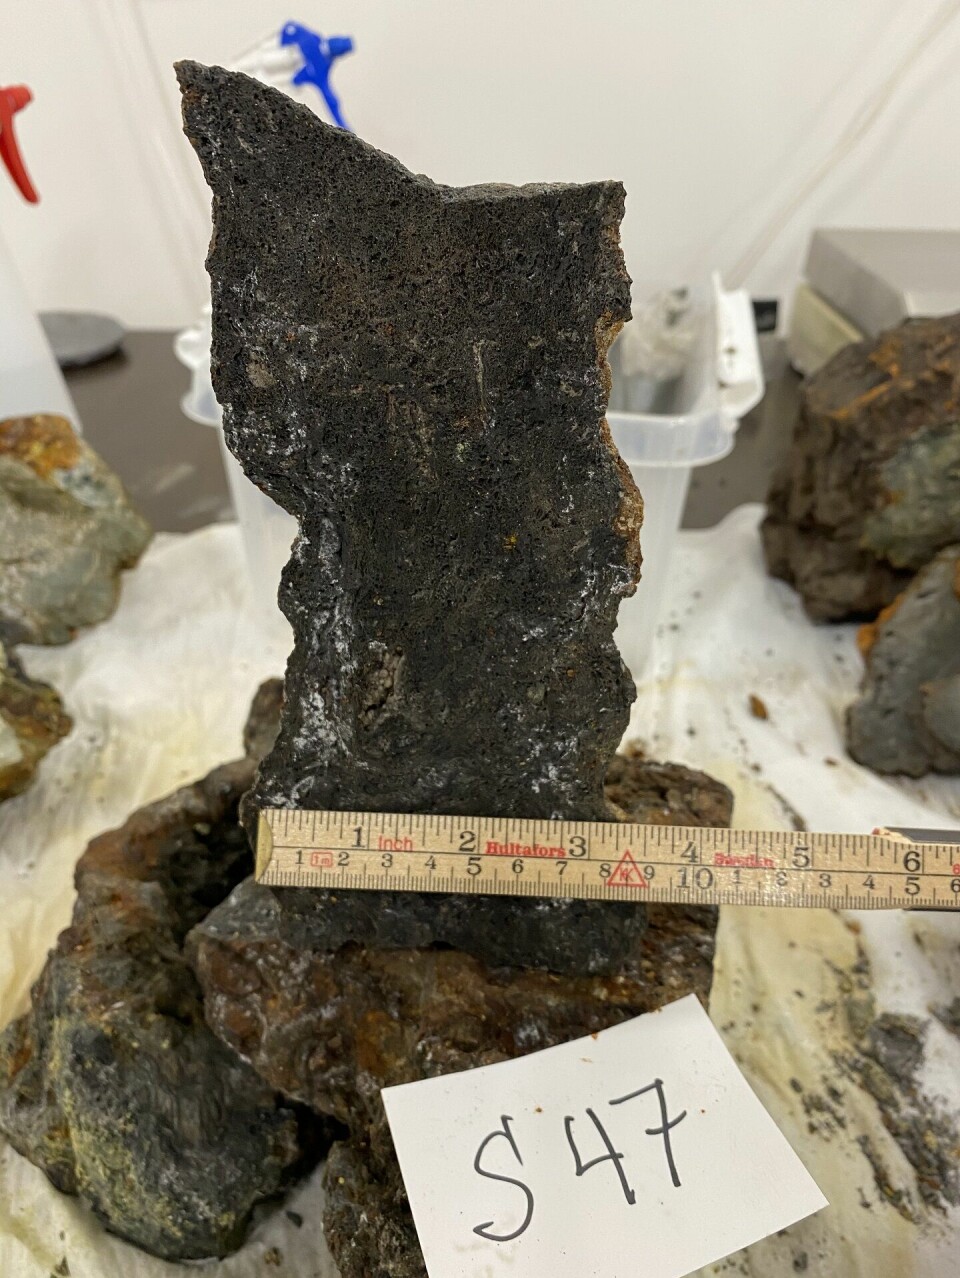 An example of an extinct and collapsed chimney from the Mohn's Treasure mound.